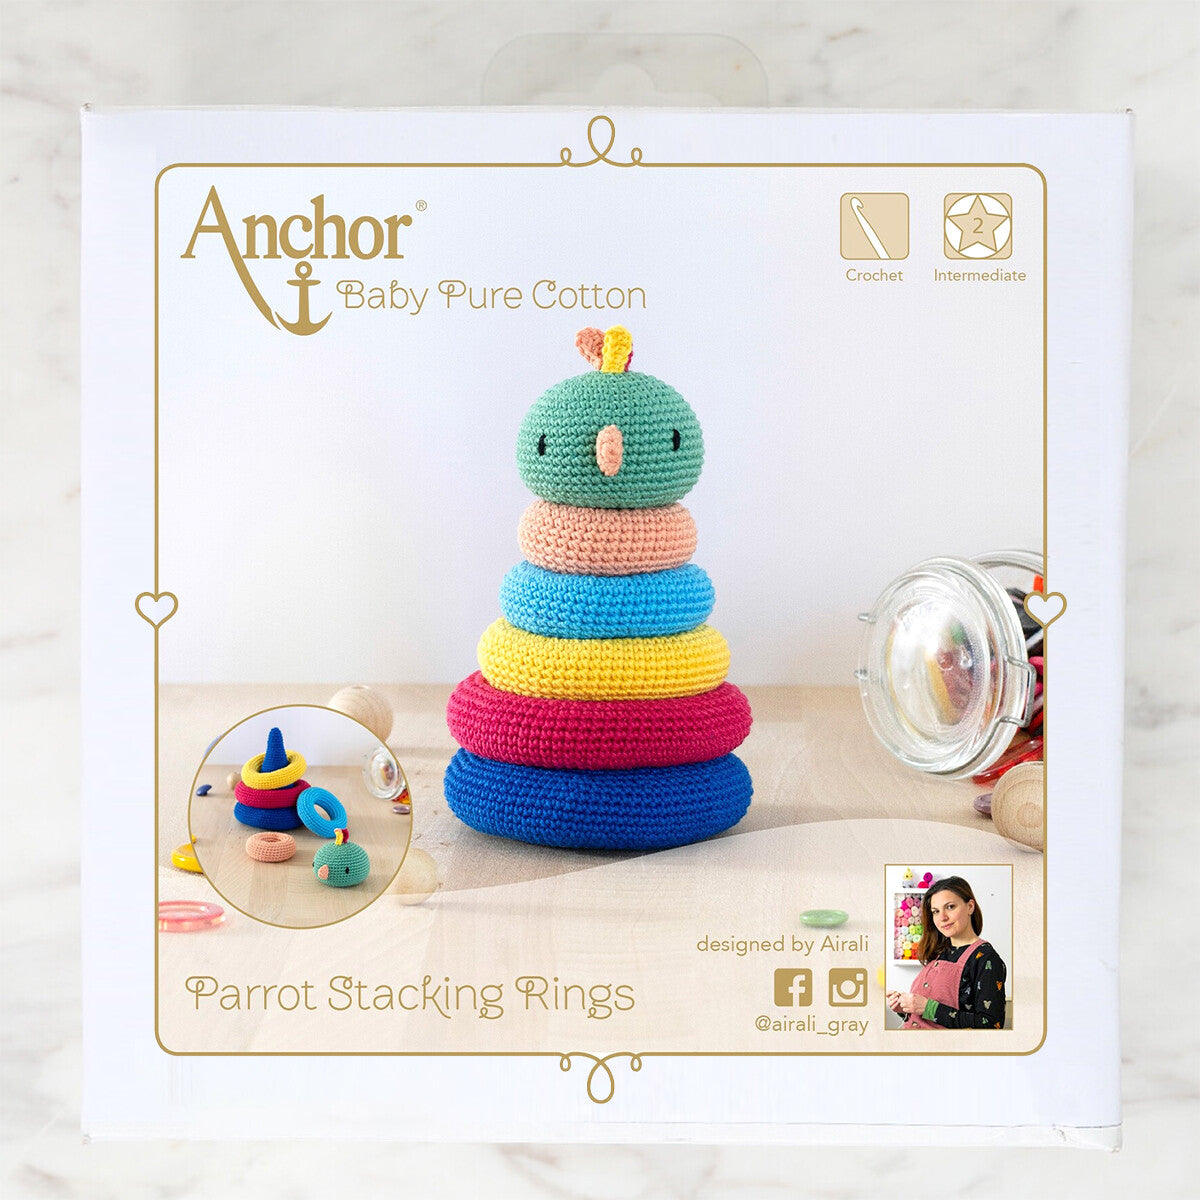 Anchor Parrot Stacking Rings Set - A28B004-09061